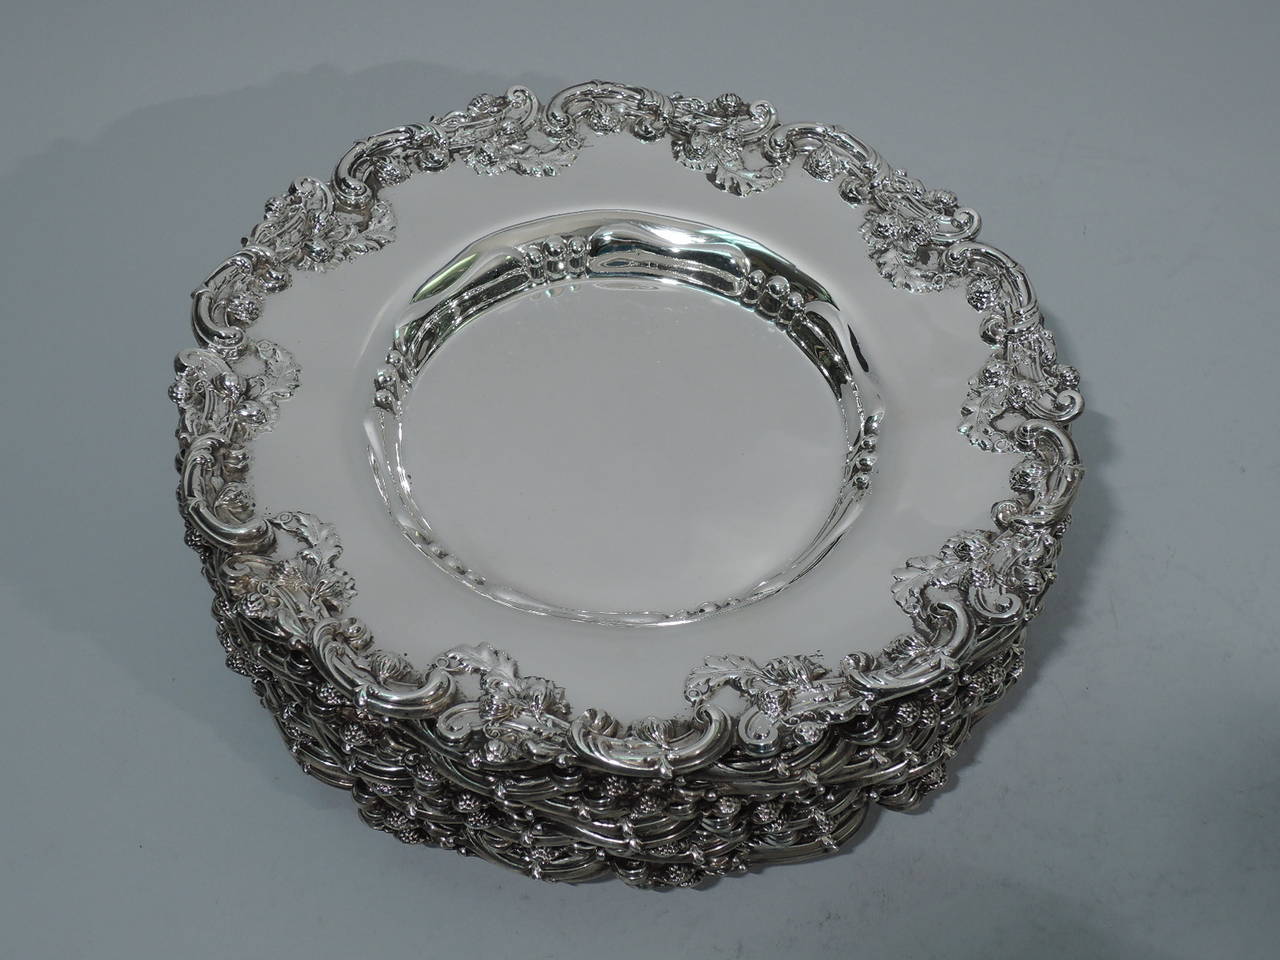 Set of ten sterling silver bread-and-butter plates. Made by Graff, Washbourne & Dunn in New York, circa 1910. Each: plate has well with chased and repoussé geometric ornament. Scrolls foliage, and flowers applied to rim. Hallmark includes model no.